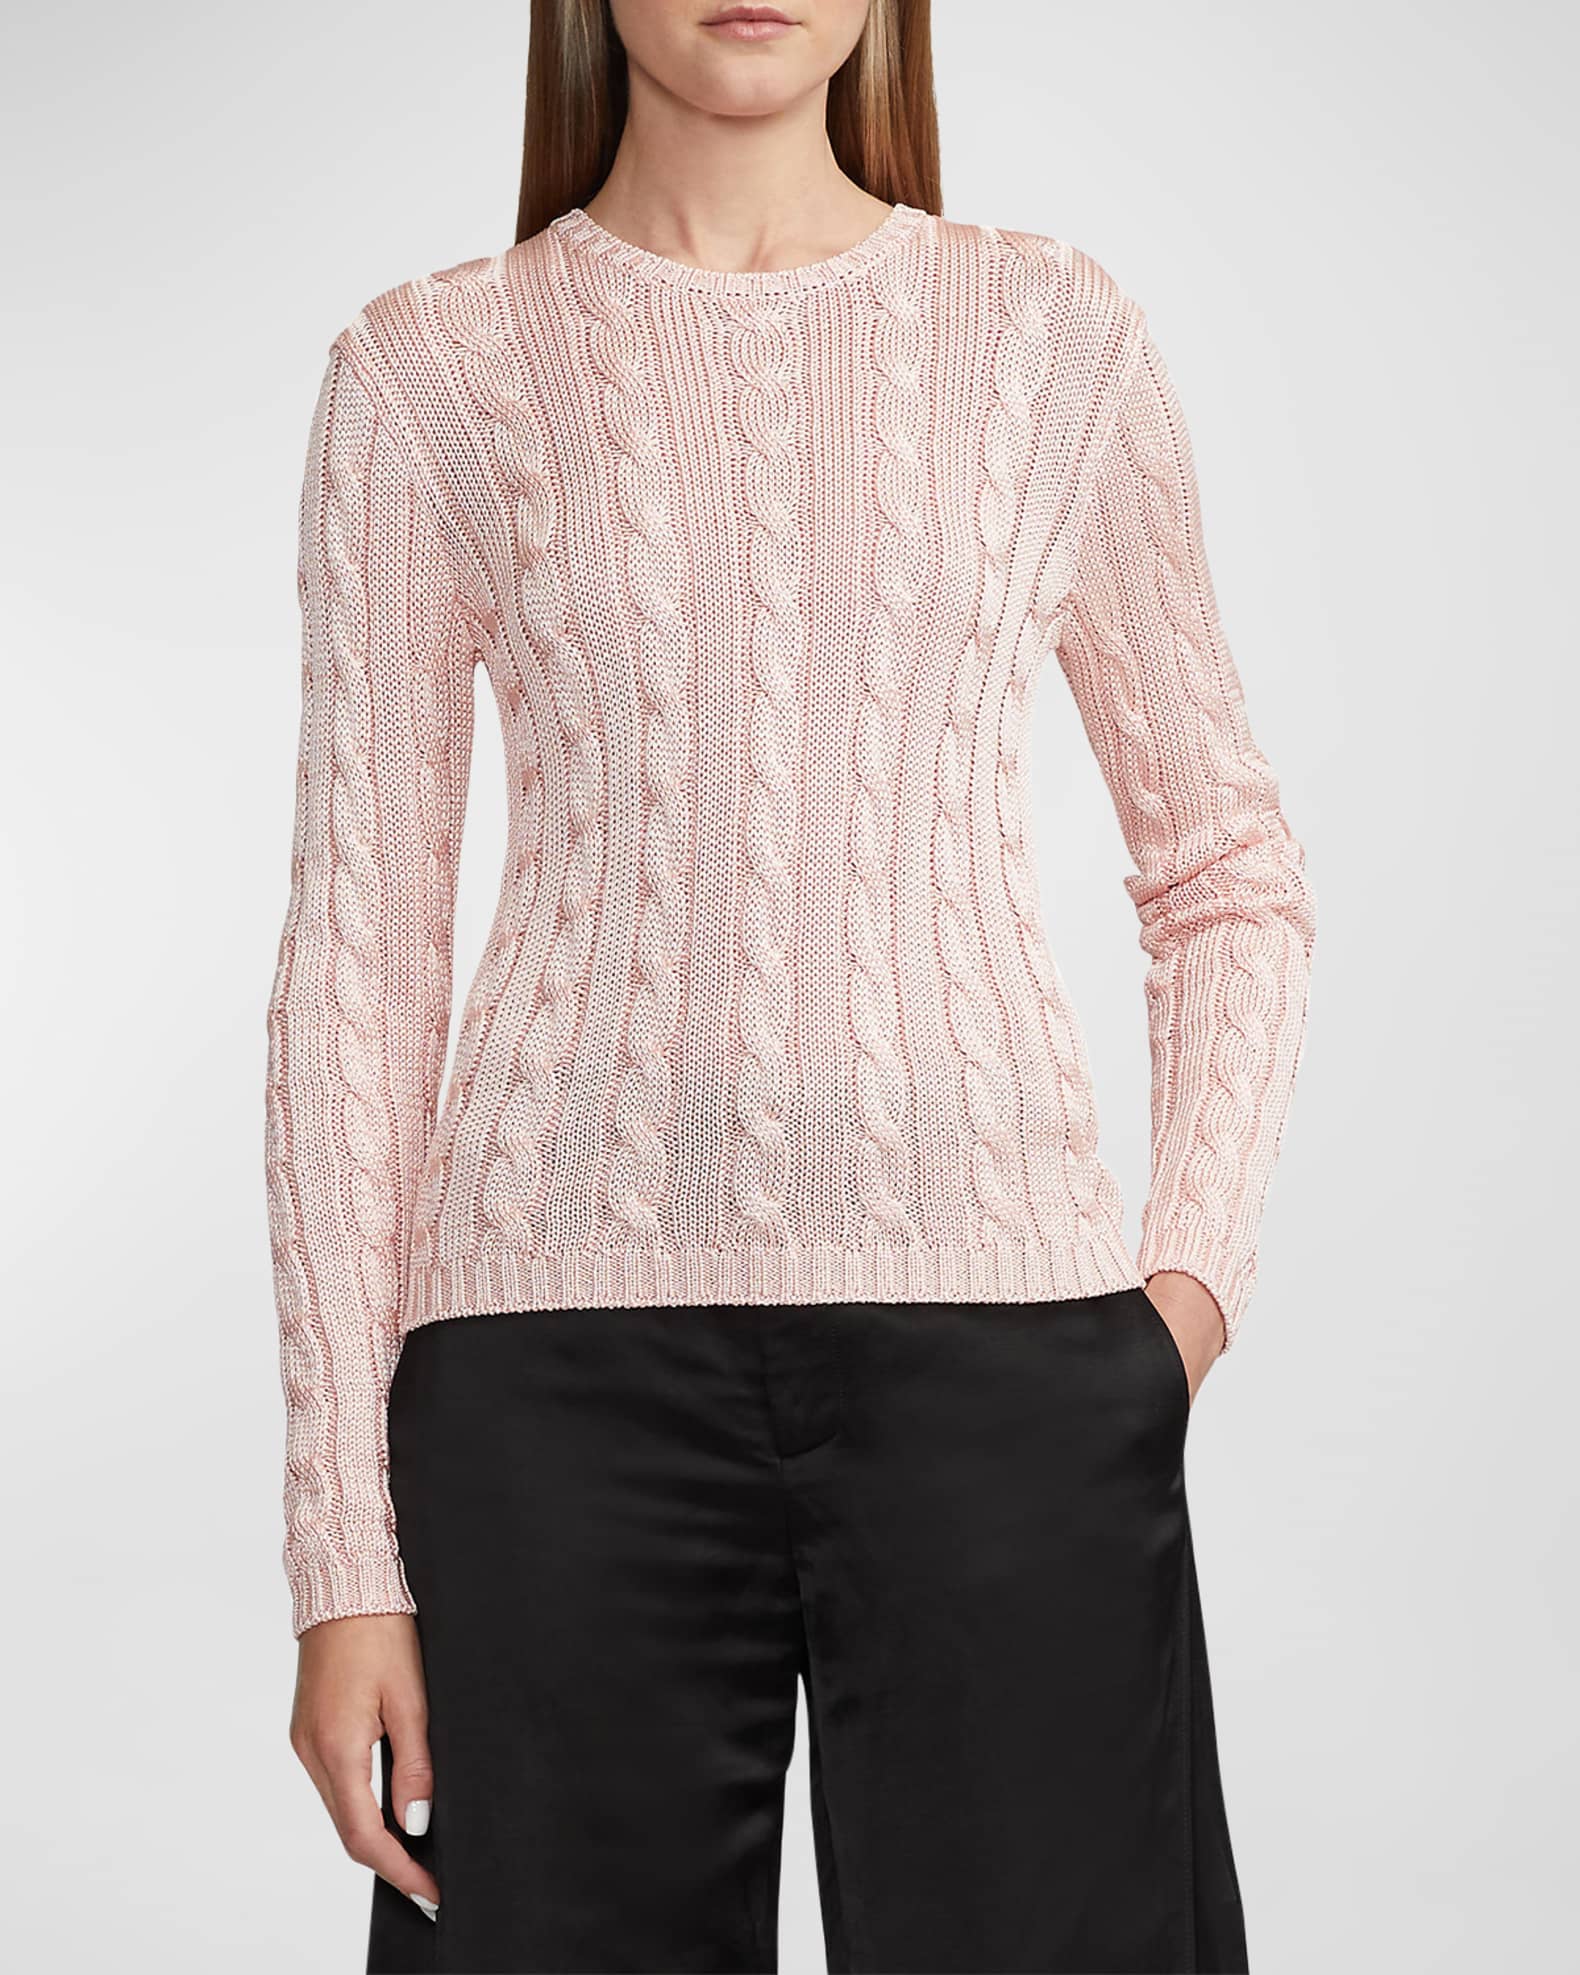 Ralph Lauren Collection Women's Silk Cable-Knit Sweater - Crystal Rose - Size Large